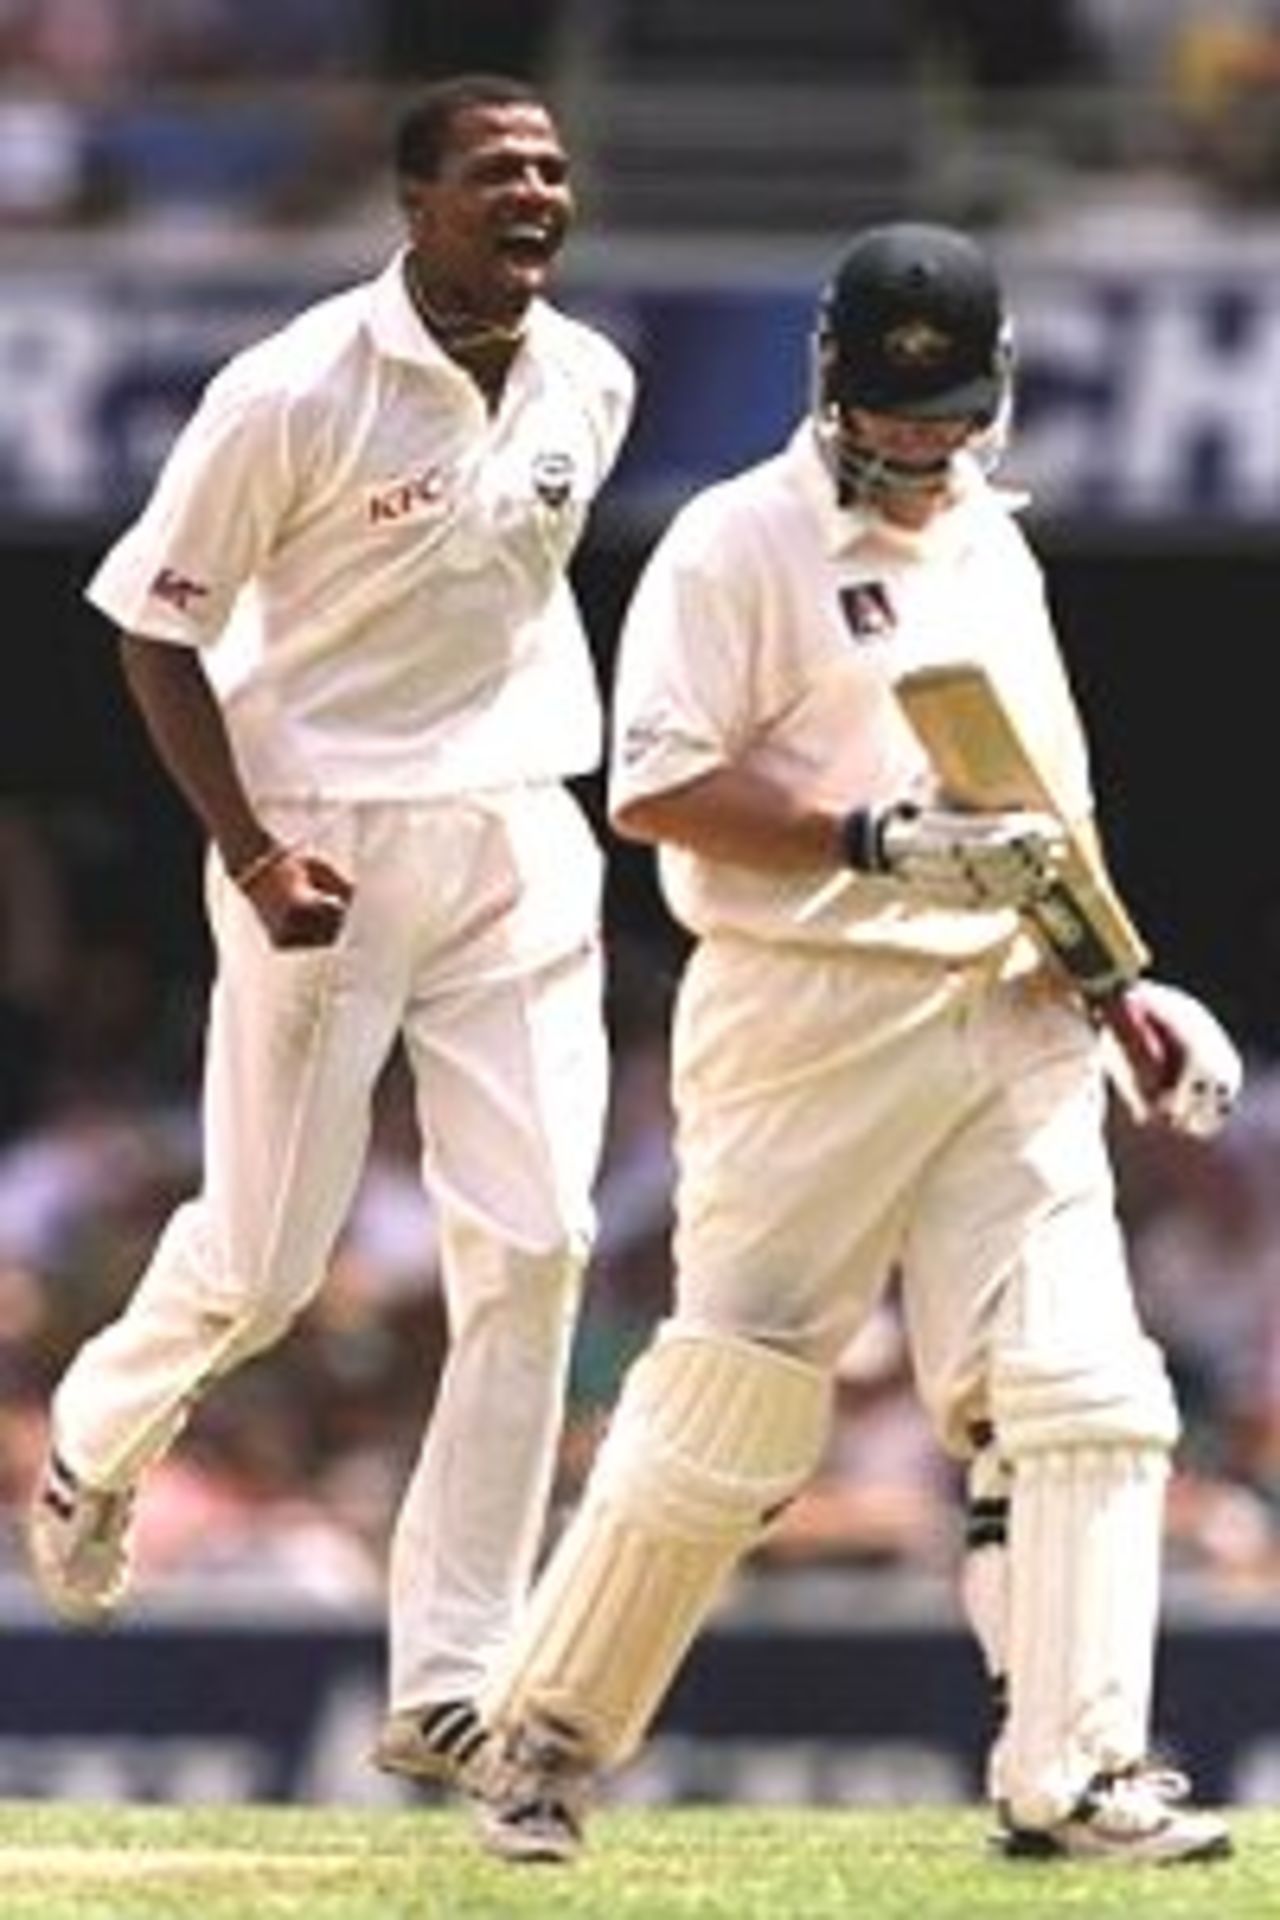 24 Nov 2000: Mervyn Dillon of West Indies celebrates the wicket of Captain of Australia Steve Waugh caught by Sherwin Campbell for 41 during the second day of the First Test match between Australia and West Indies at The Gabba cricket ground in Brisbane, Australia.